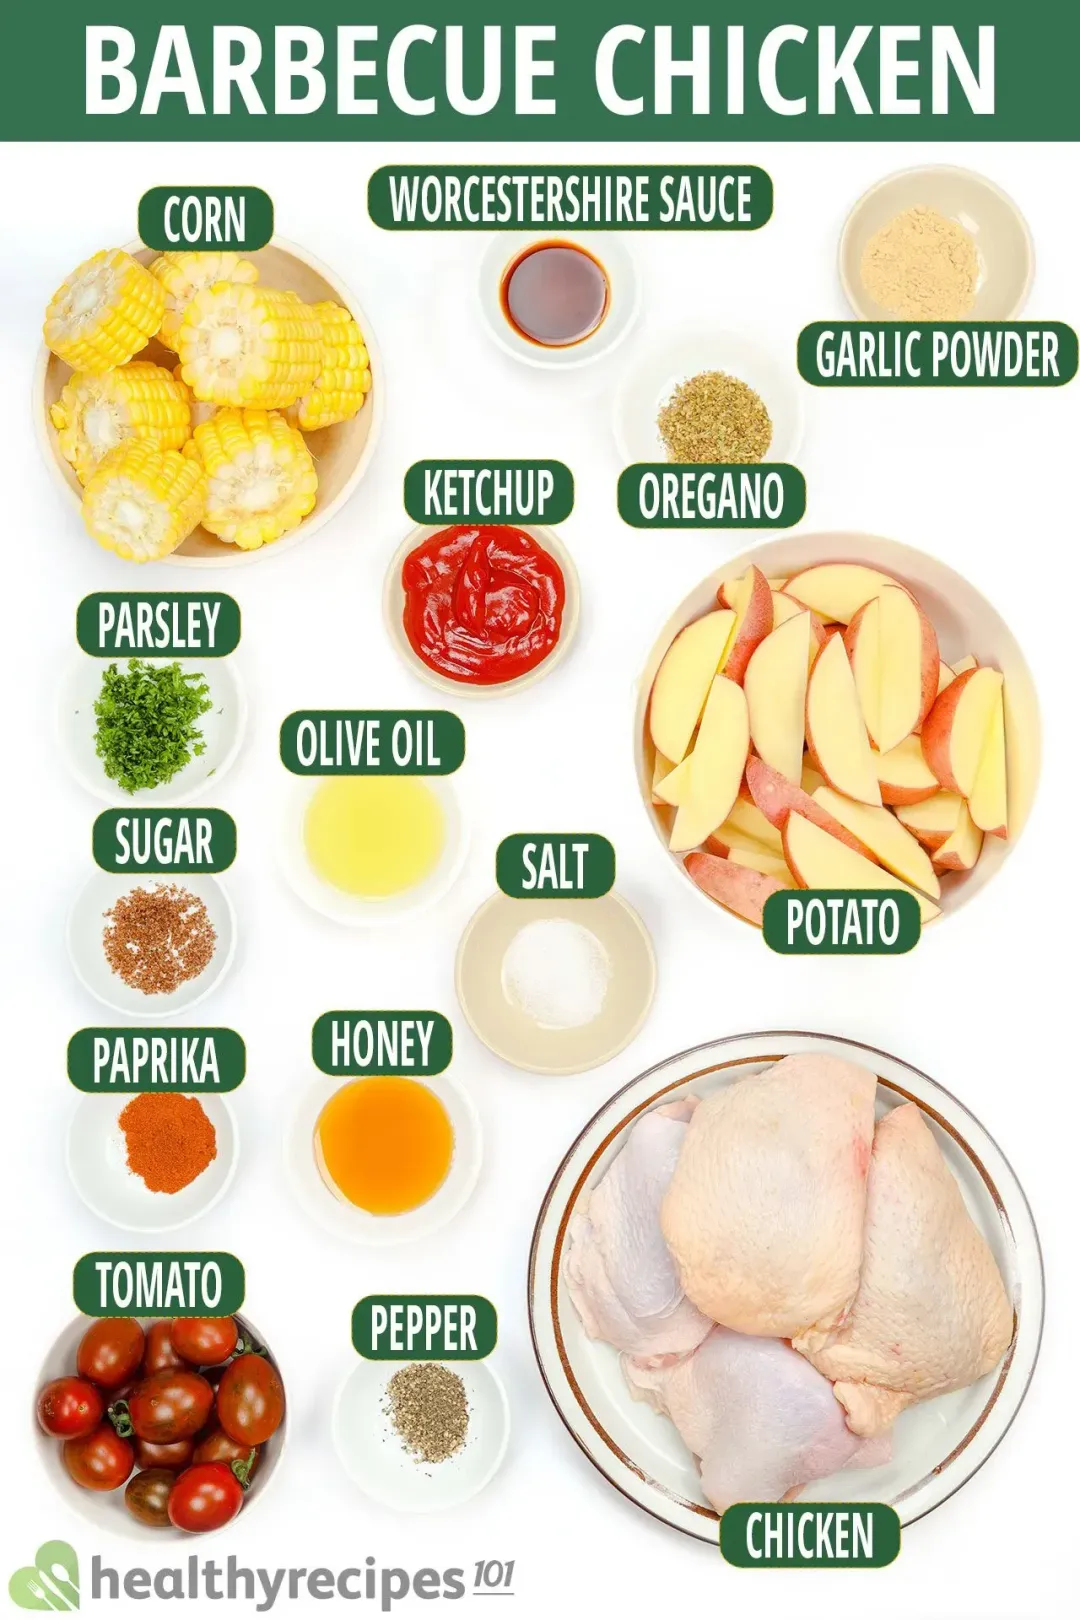 Ingredients for Barbecue Chicken